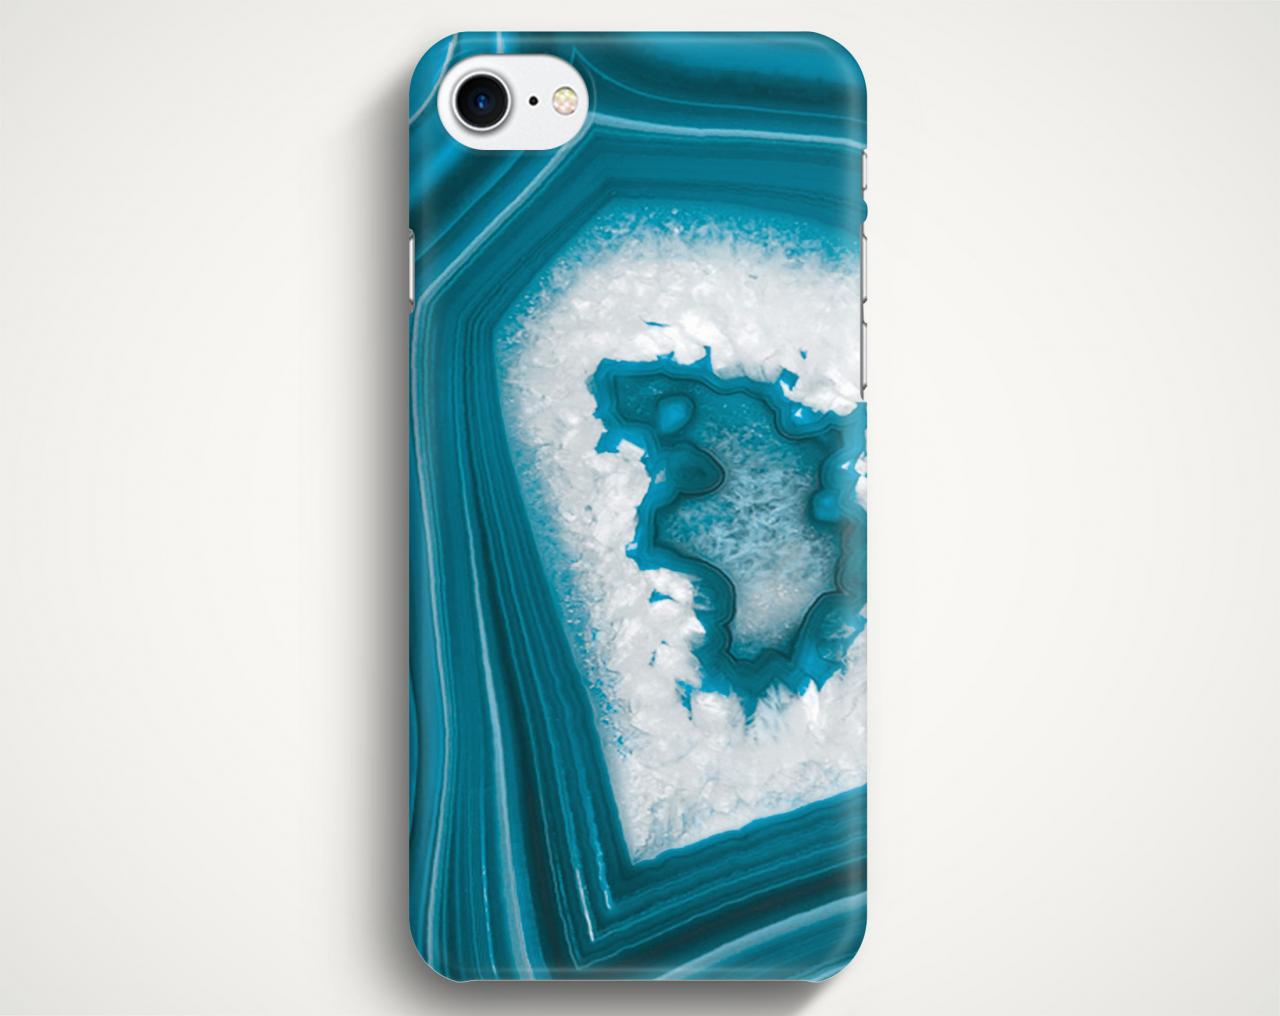 Blue Agate Stone Texture Case For Iphone 7 Iphone 7 Plus Samsung Galaxy S8 Galaxy S7 Galaxy A3 Galaxy A5 Galaxy A7 Lg G6 Lg G5 Htc 10